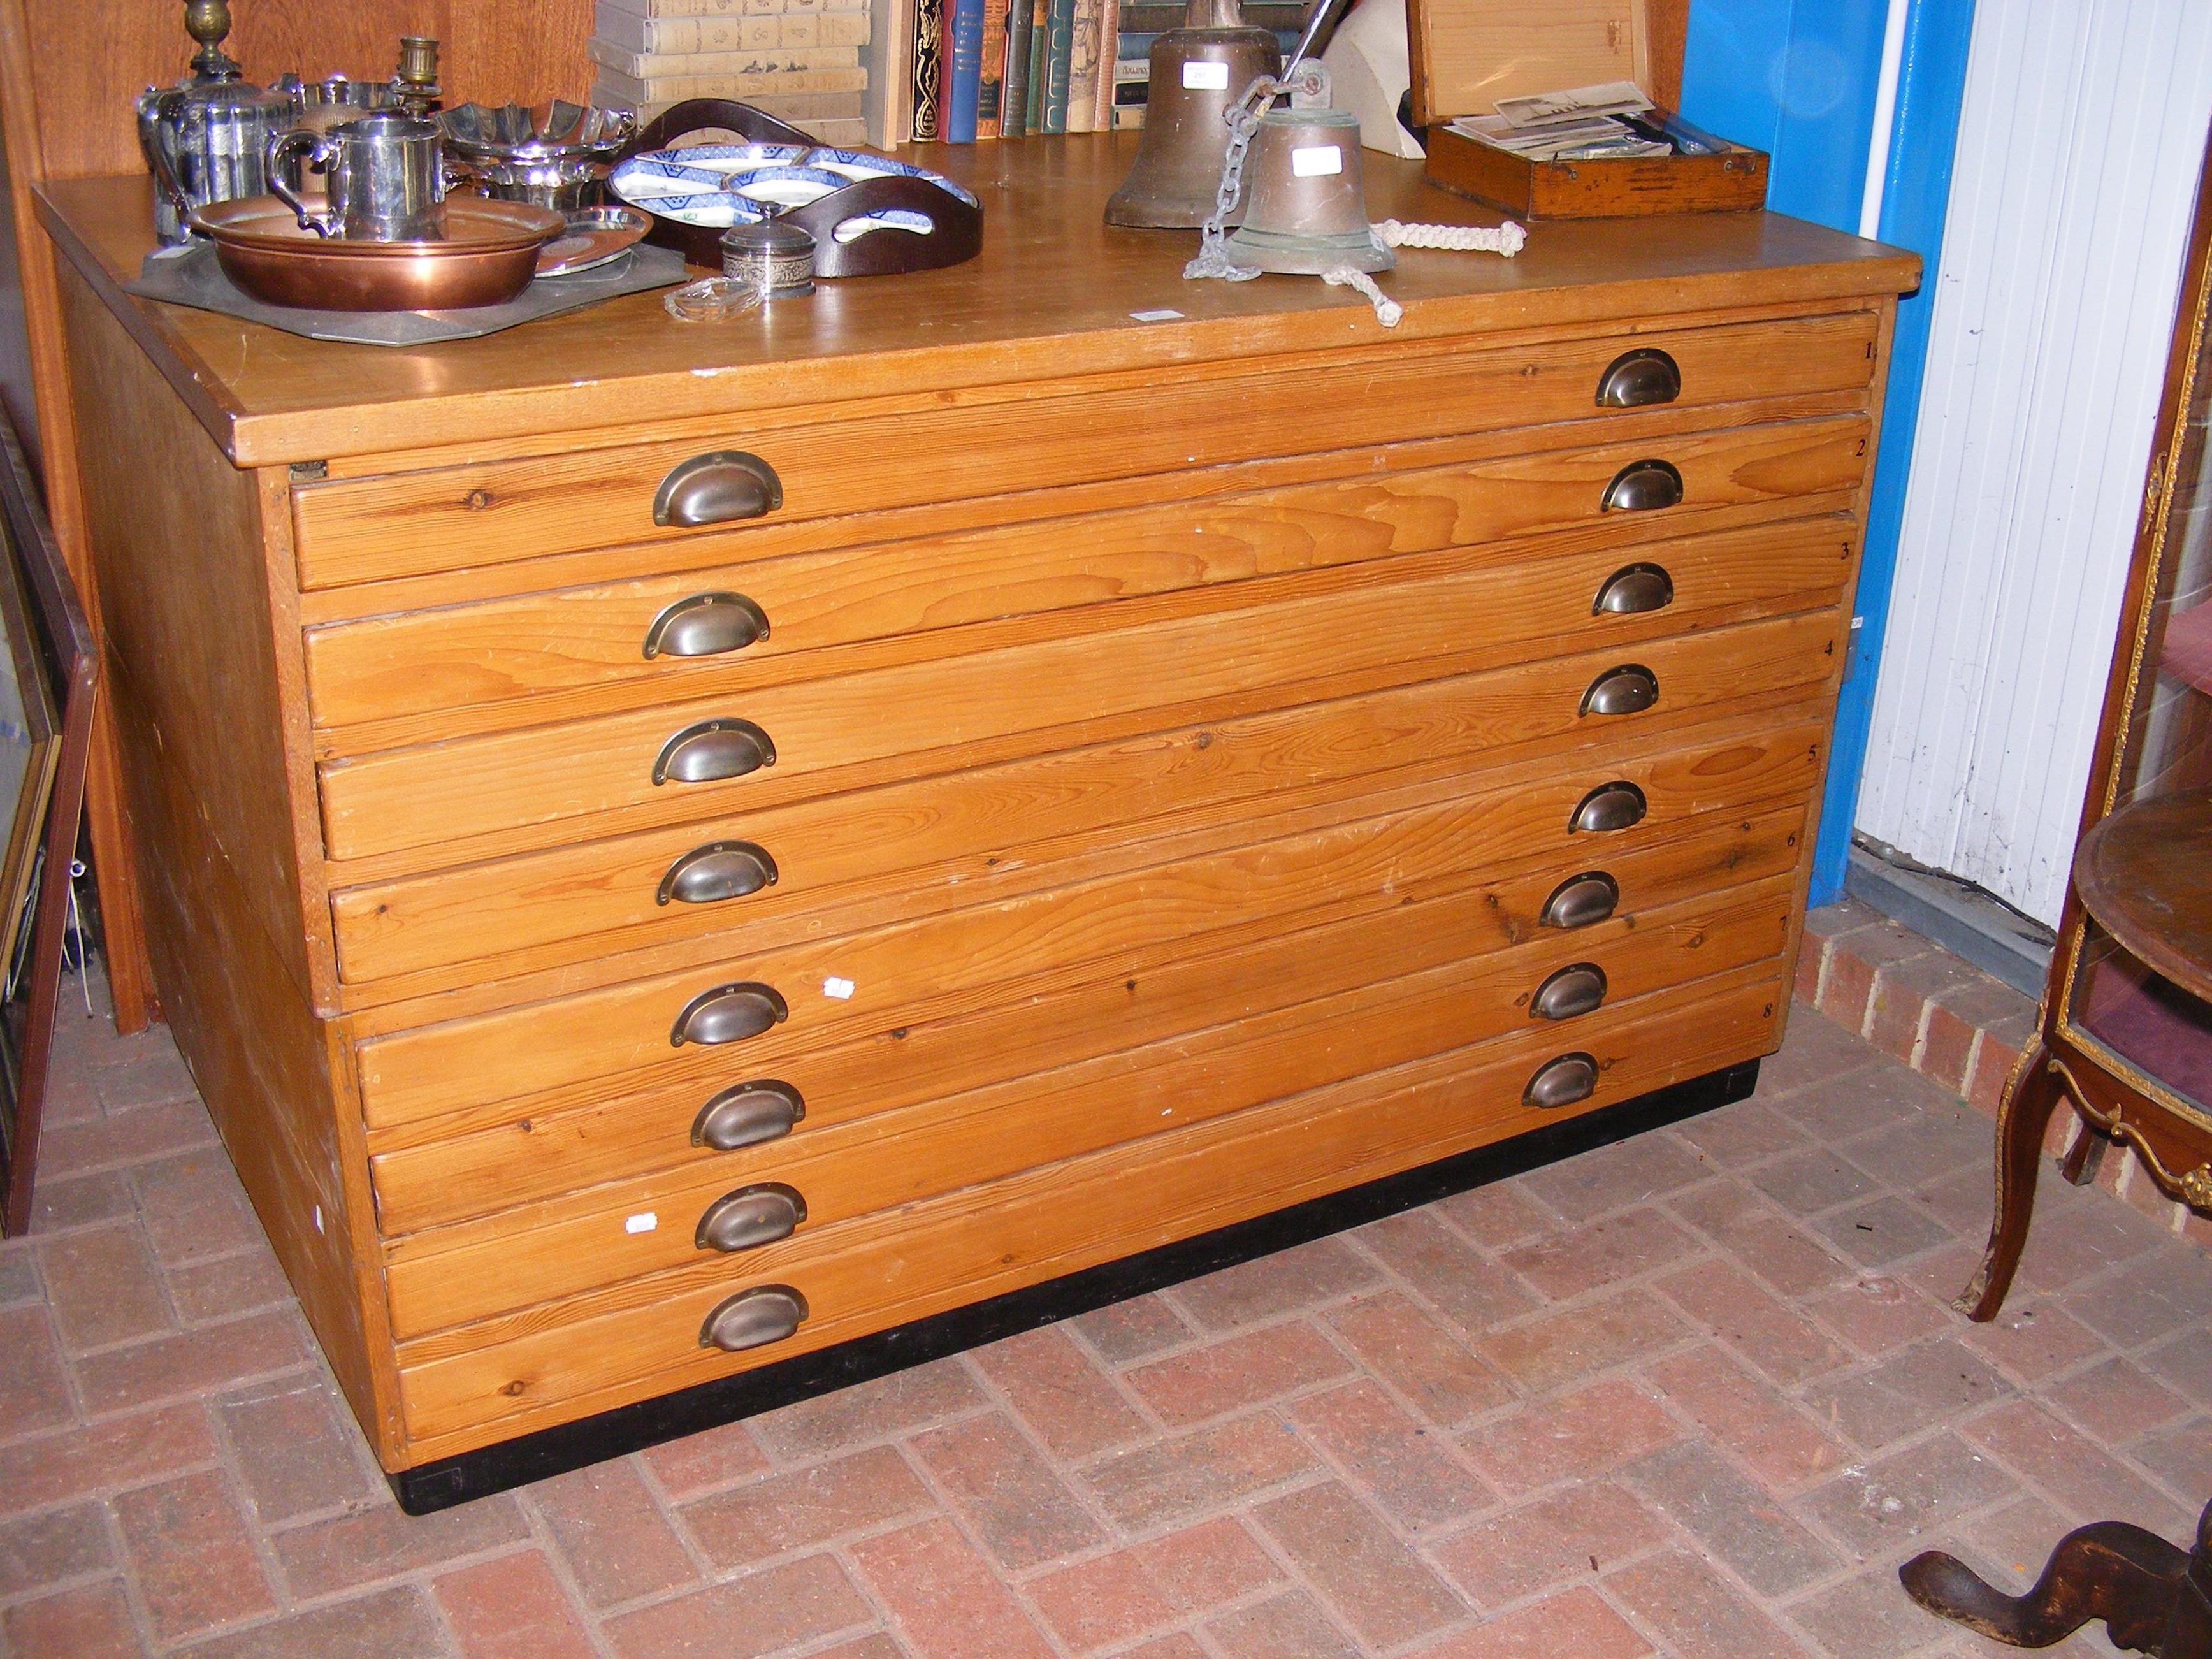 An antique eight drawer plan chest - 150cms wide